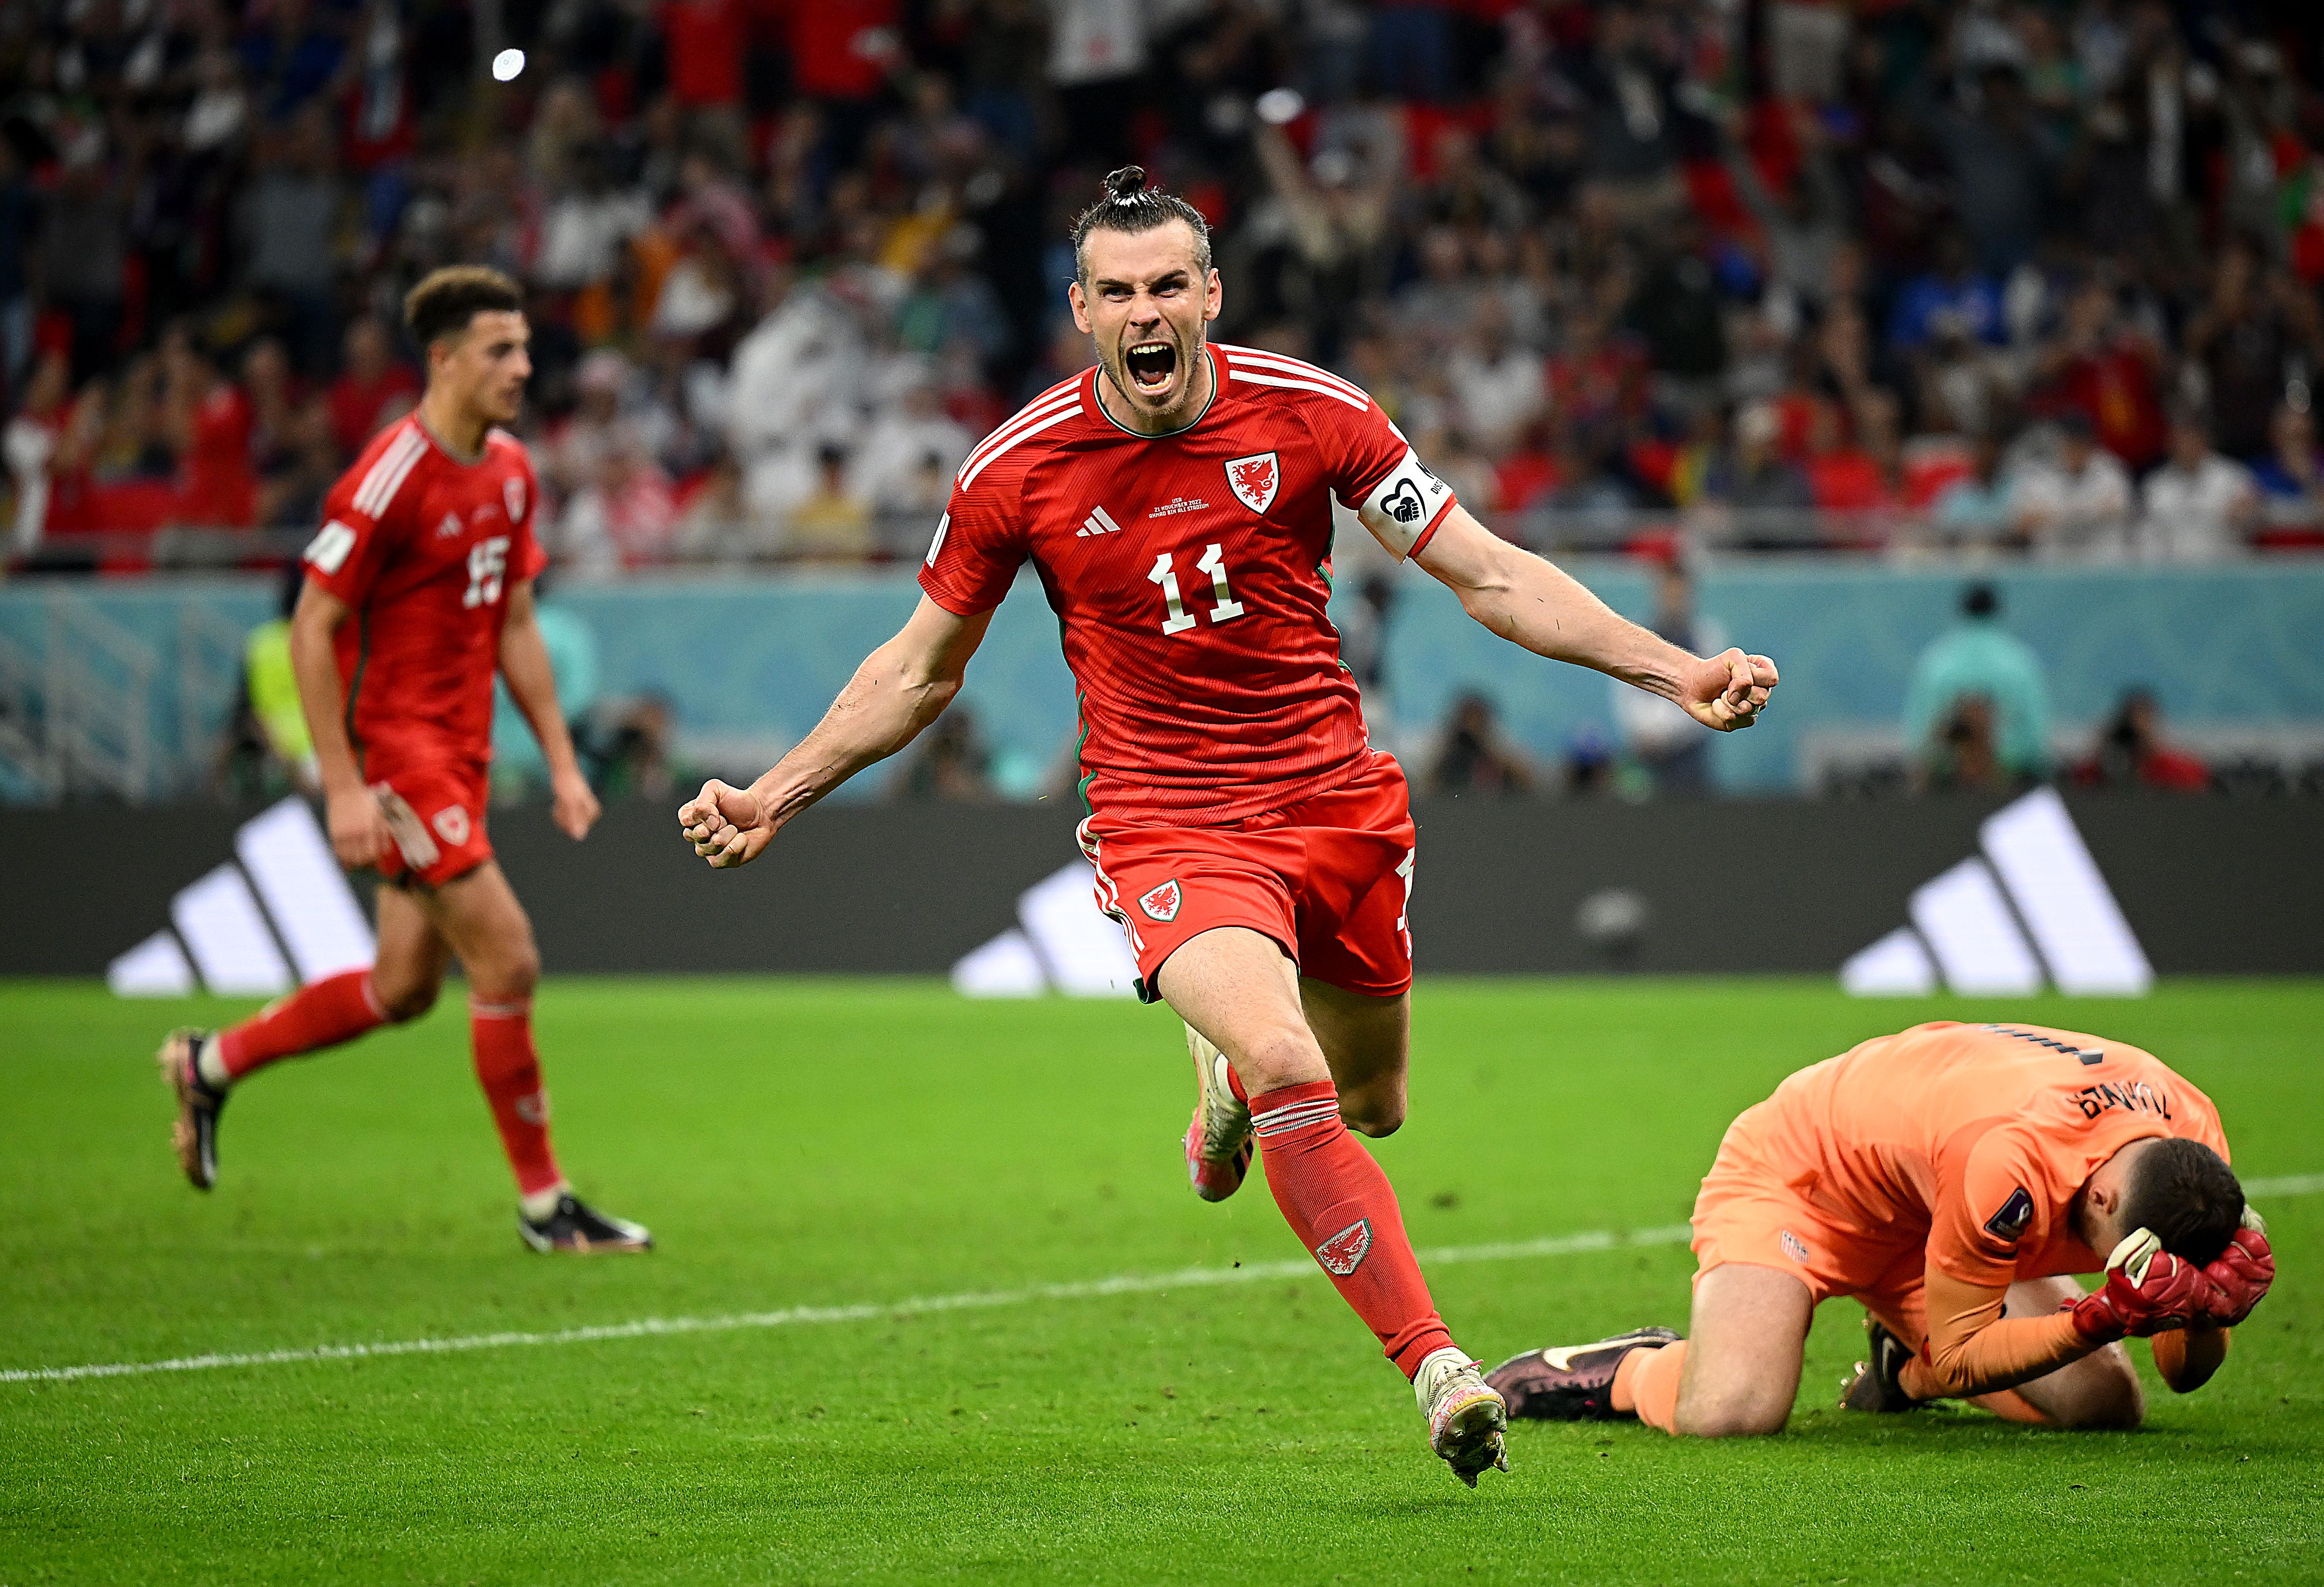 DOHA, QATAR - NOVEMBER 21: Gareth Bale of Wales celebrates with teammates after scoring their team's first goal via a penalty past Matt Turner of United States during the FIFA World Cup Qatar 2022 Group B match between USA and Wales at Ahmad Bin Ali Stadium on November 21, 2022 in Doha, Qatar. (Photo by Clive Mason/Getty Images)